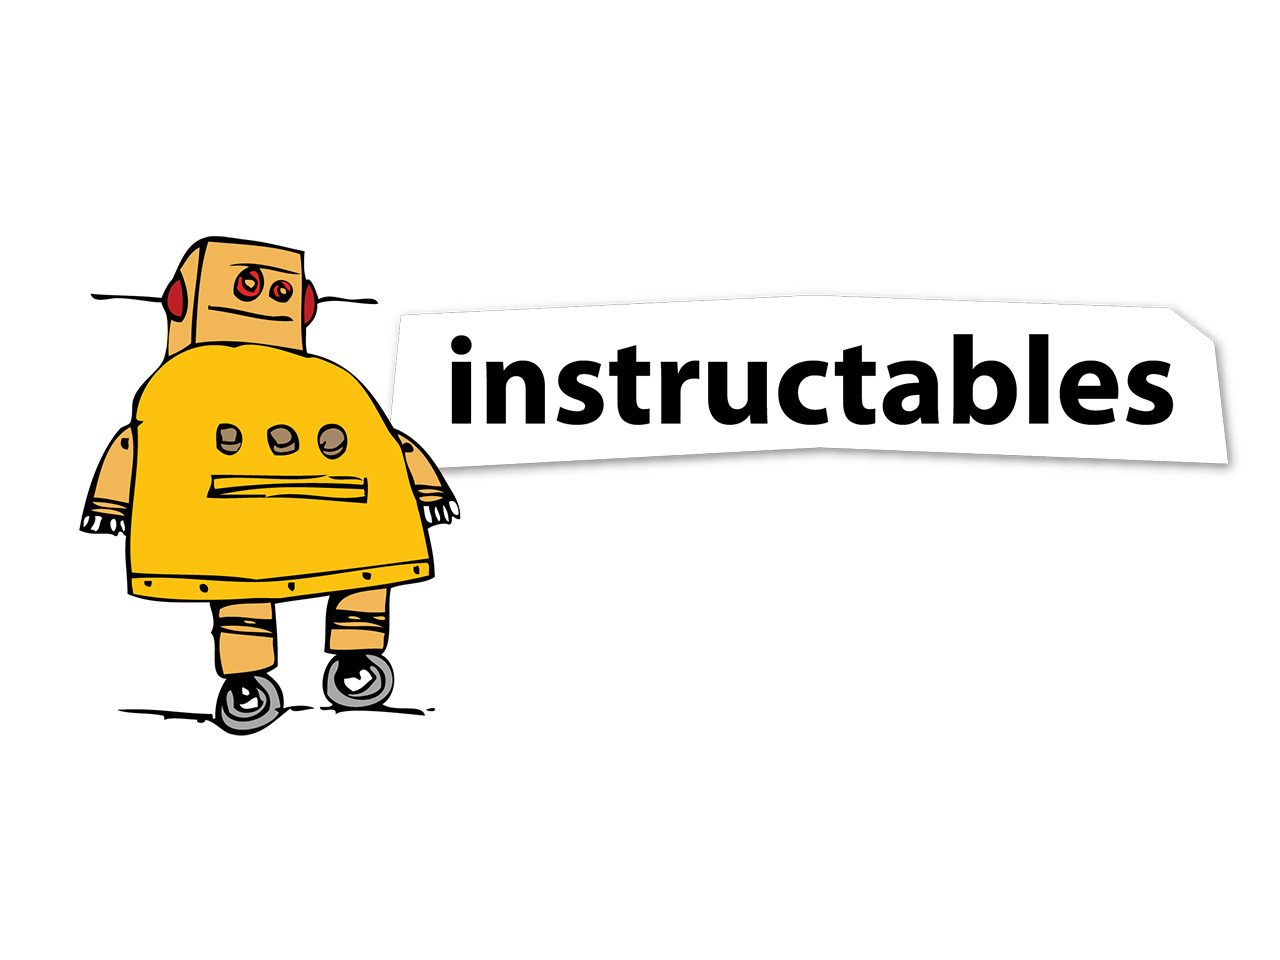 instructables